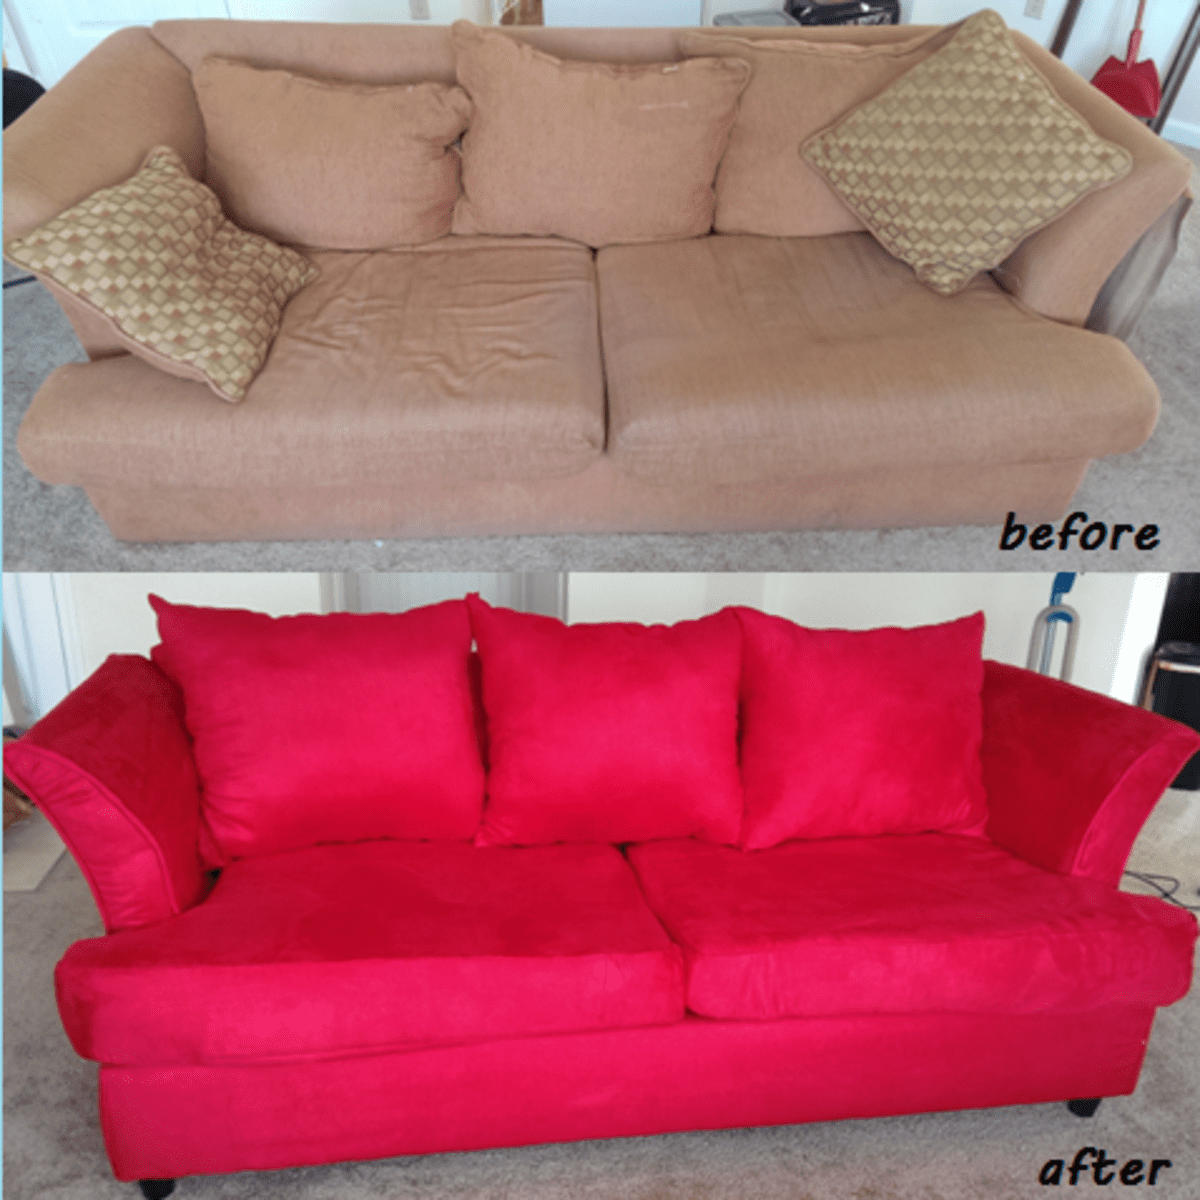 Reupholstering A Couch, How Much Does It Cost To Reupholster A Leather Couch